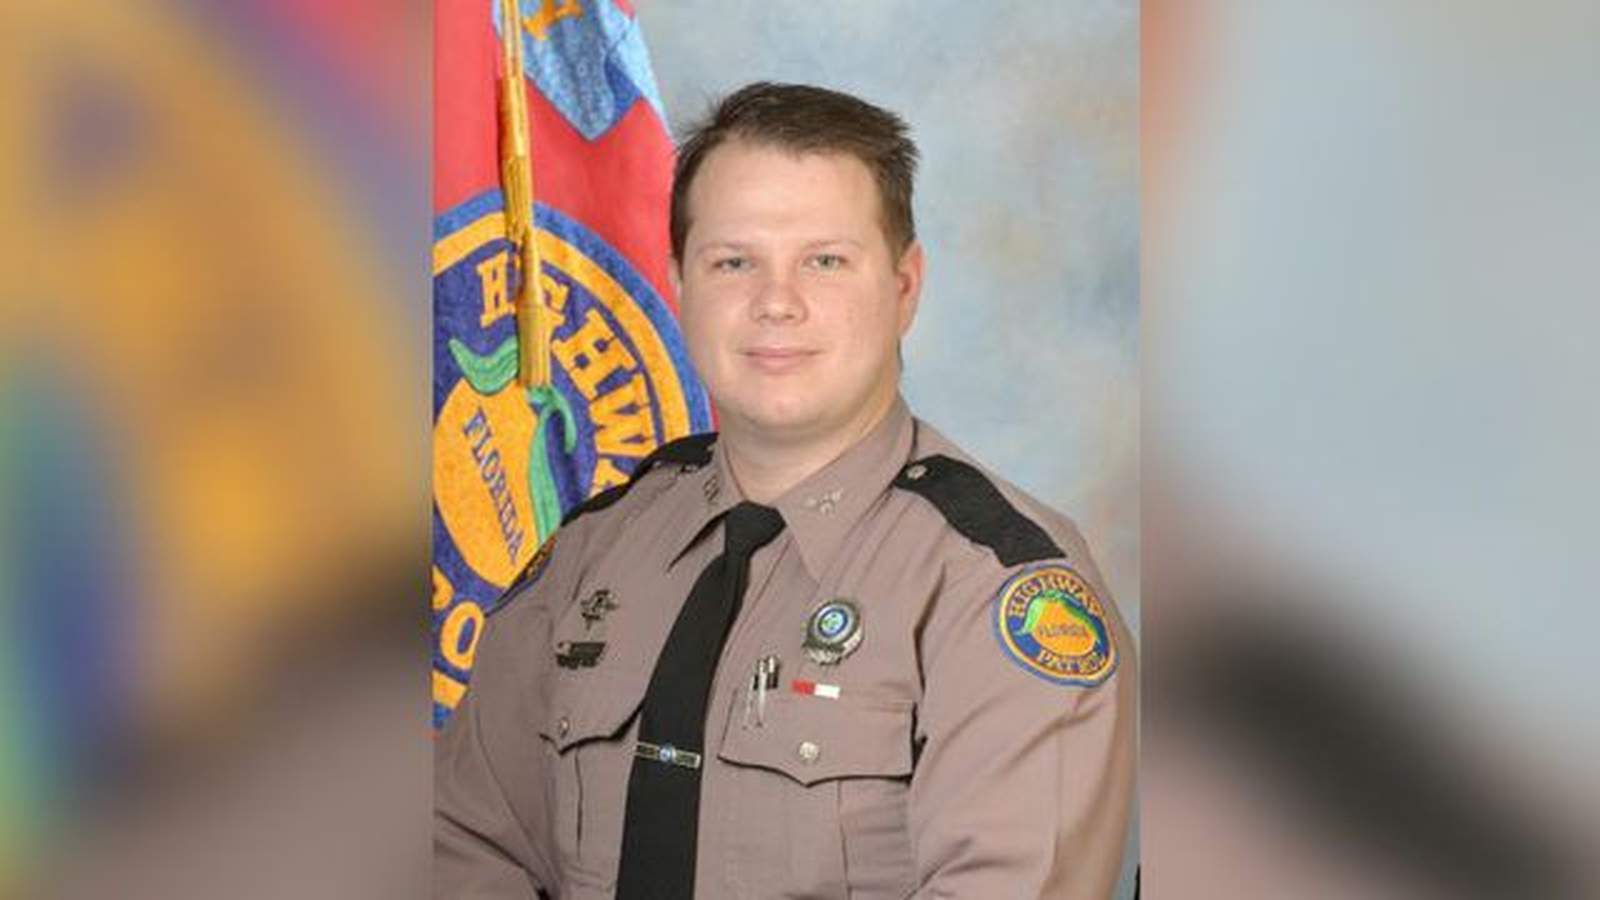 Report: Lane closure warning sign was removed before trooper died in SR 408 crash